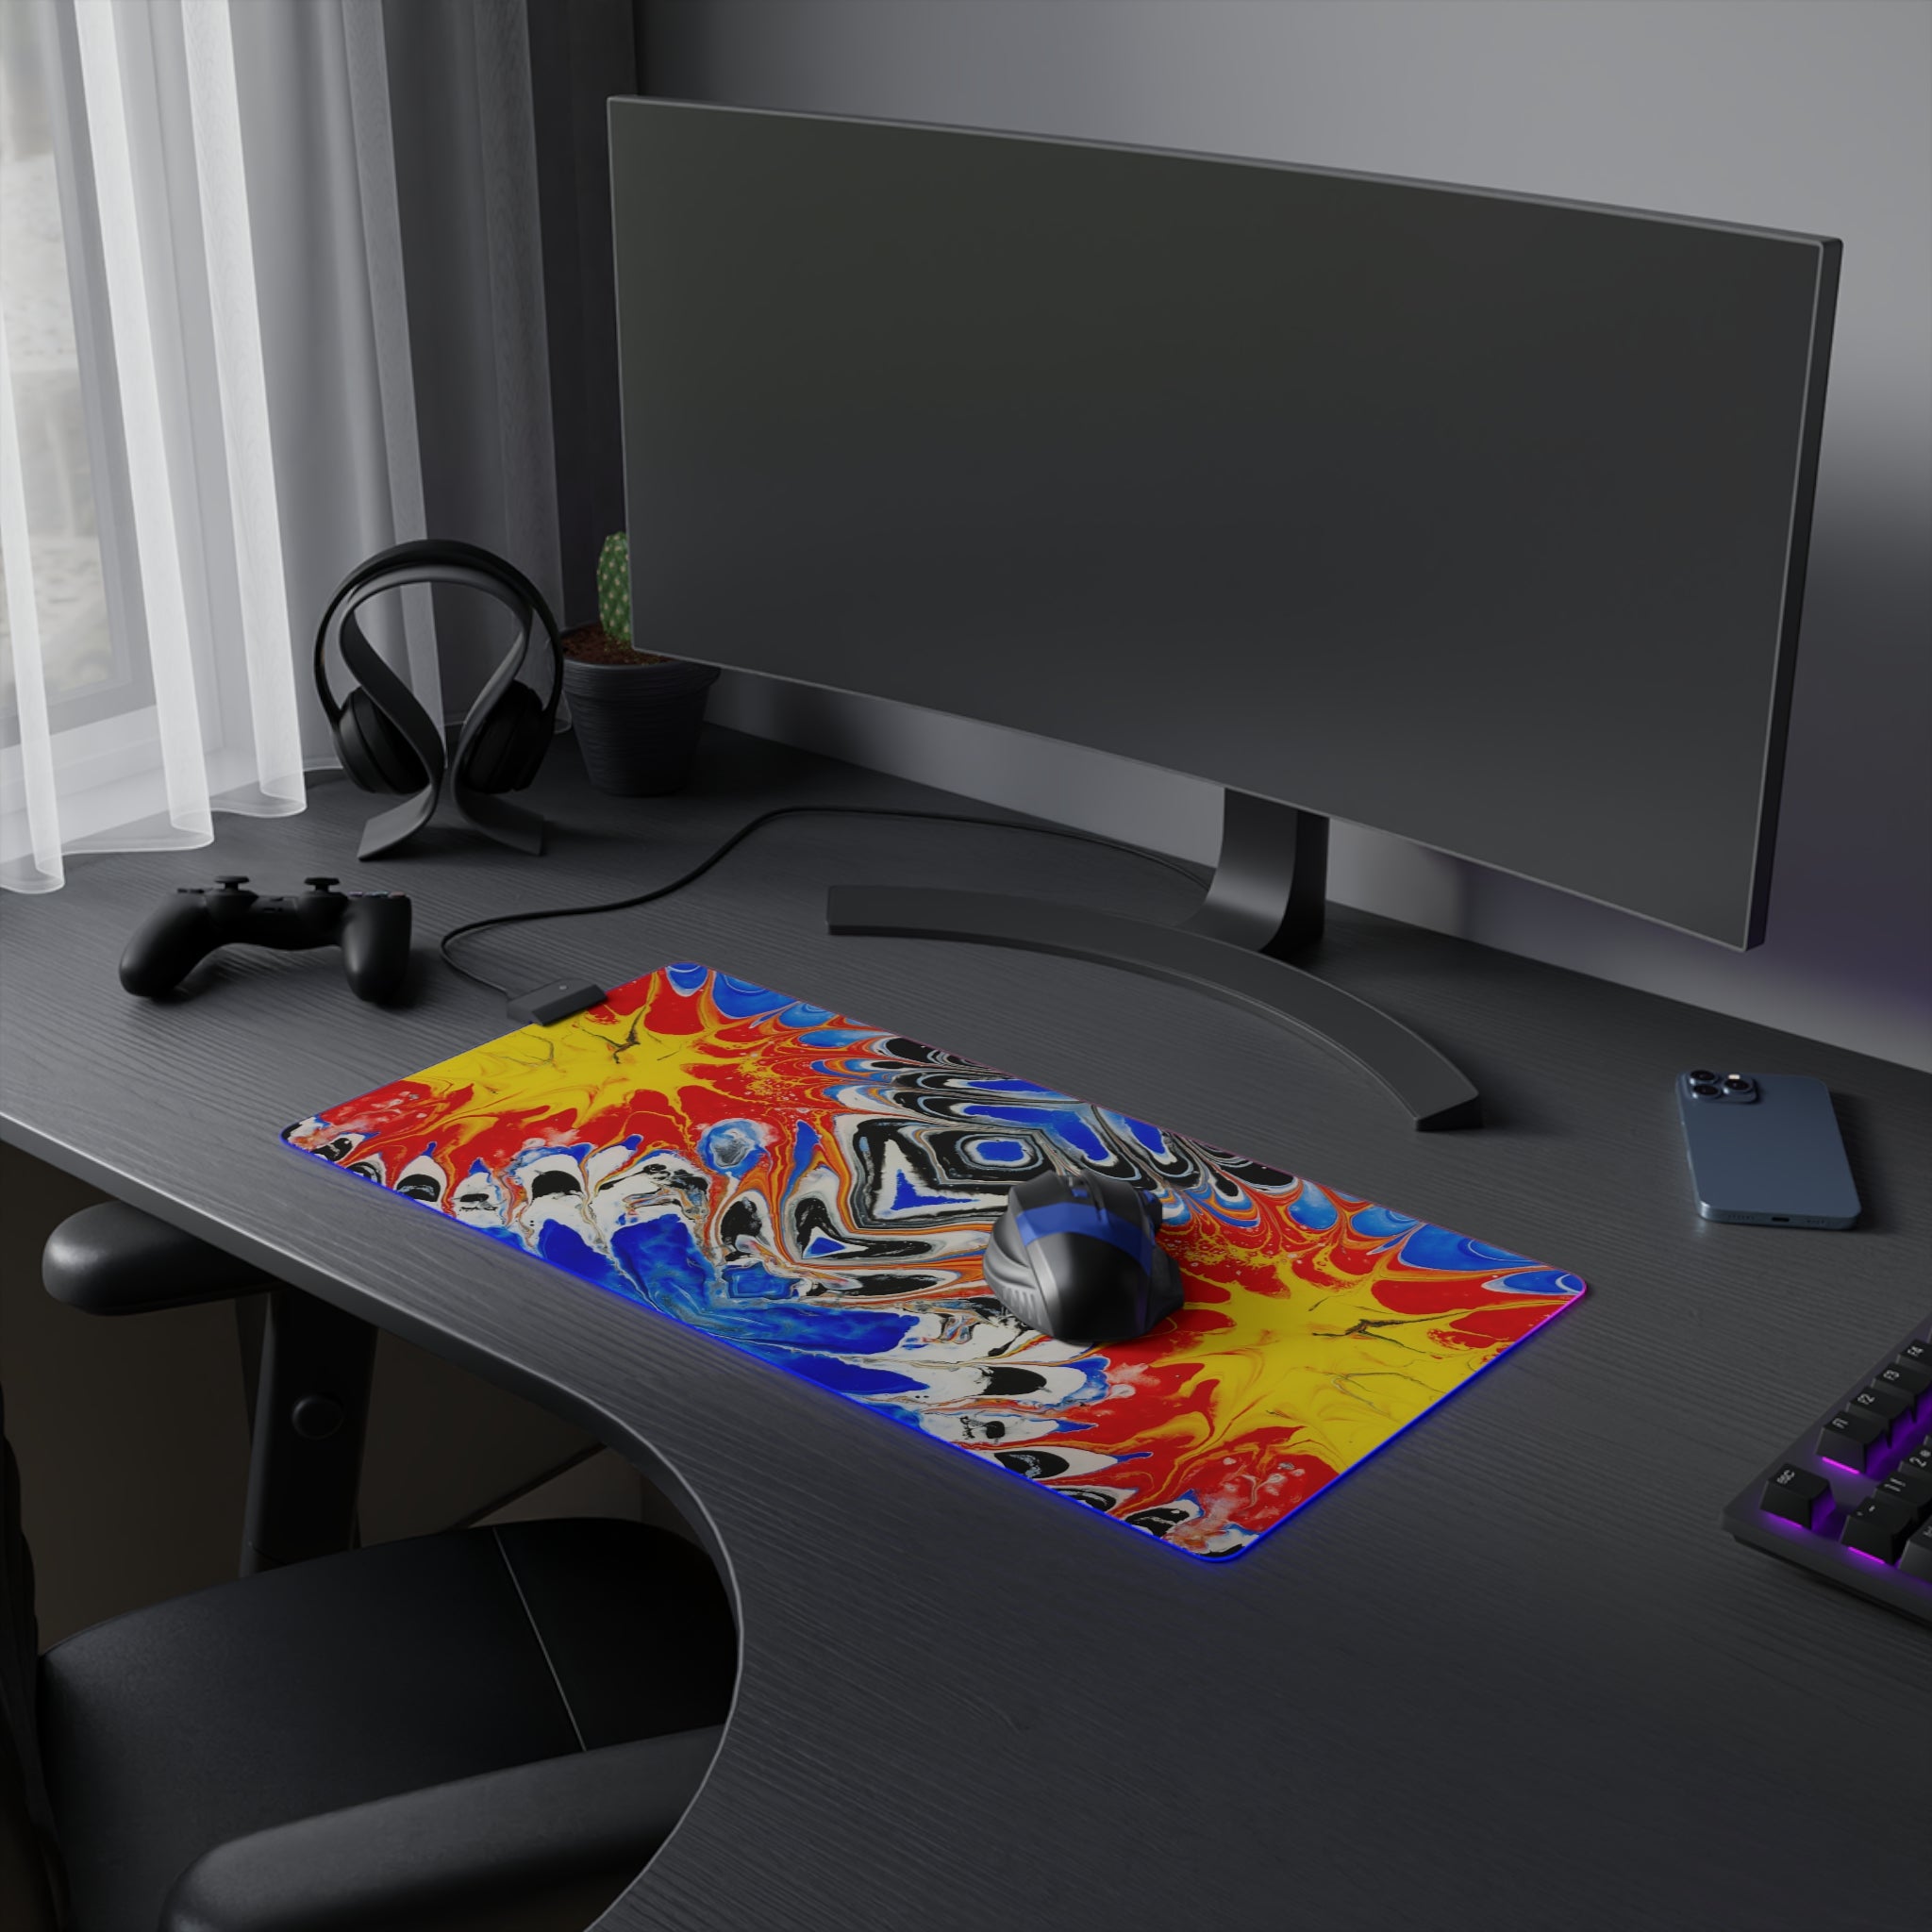 Central Core - LED Gaming Mouse Pad